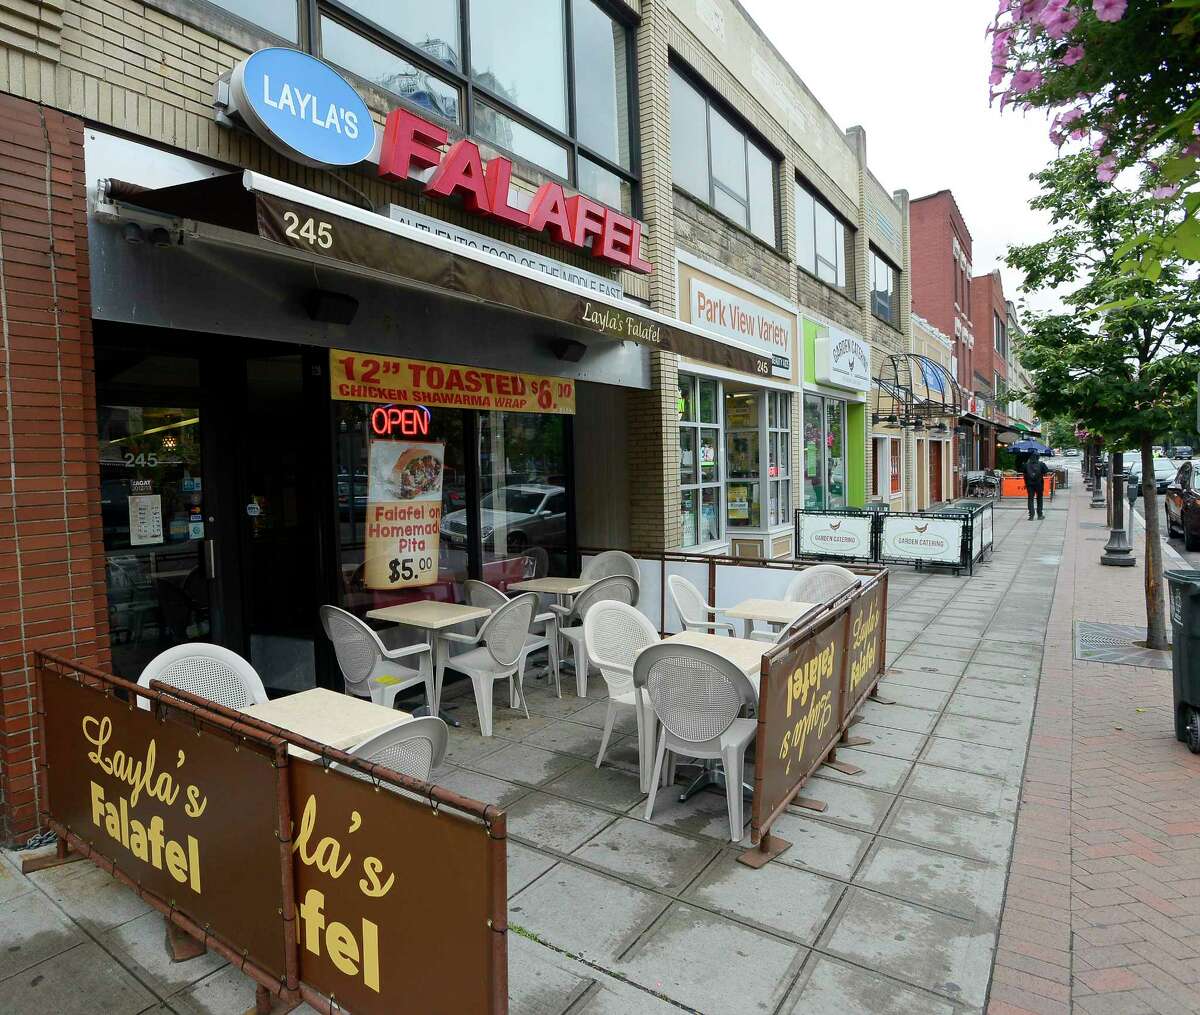 An exterior view of Layla's Falafel on Main Street in Stamford, Connecticut on Tuesday, August 15, 2017.